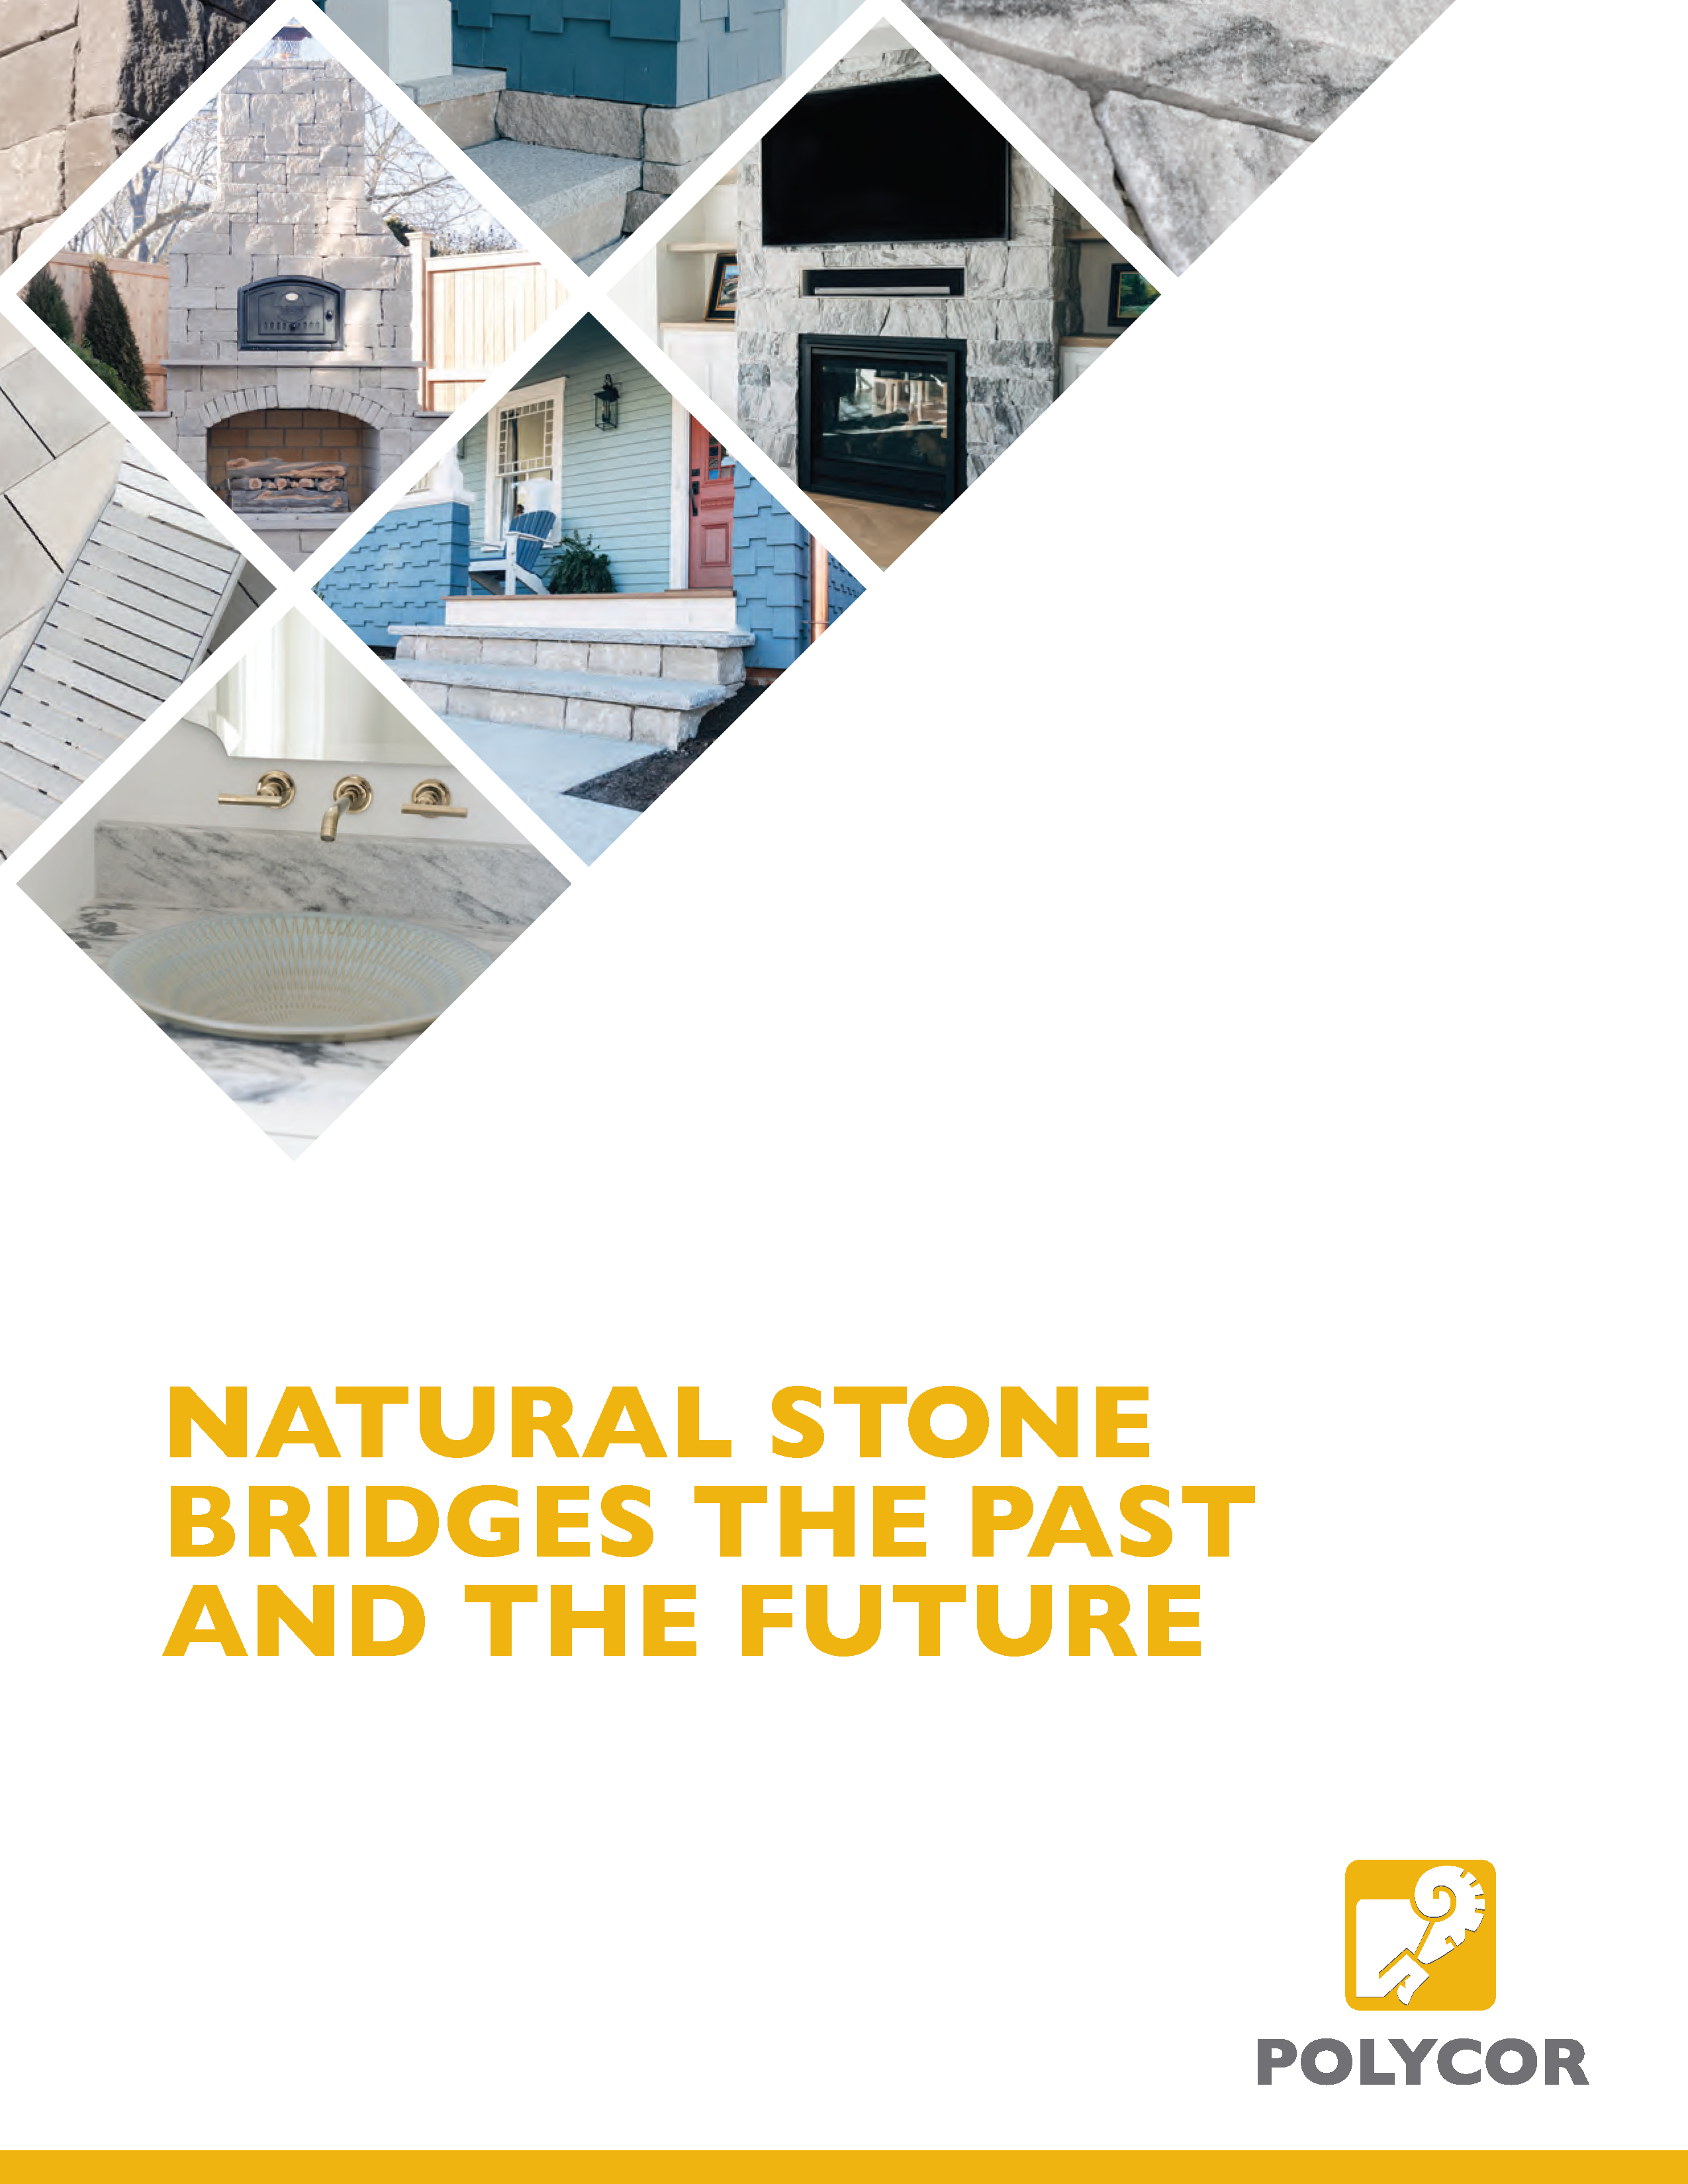 Polycor_Natural Stone Bridges the Past and the Future